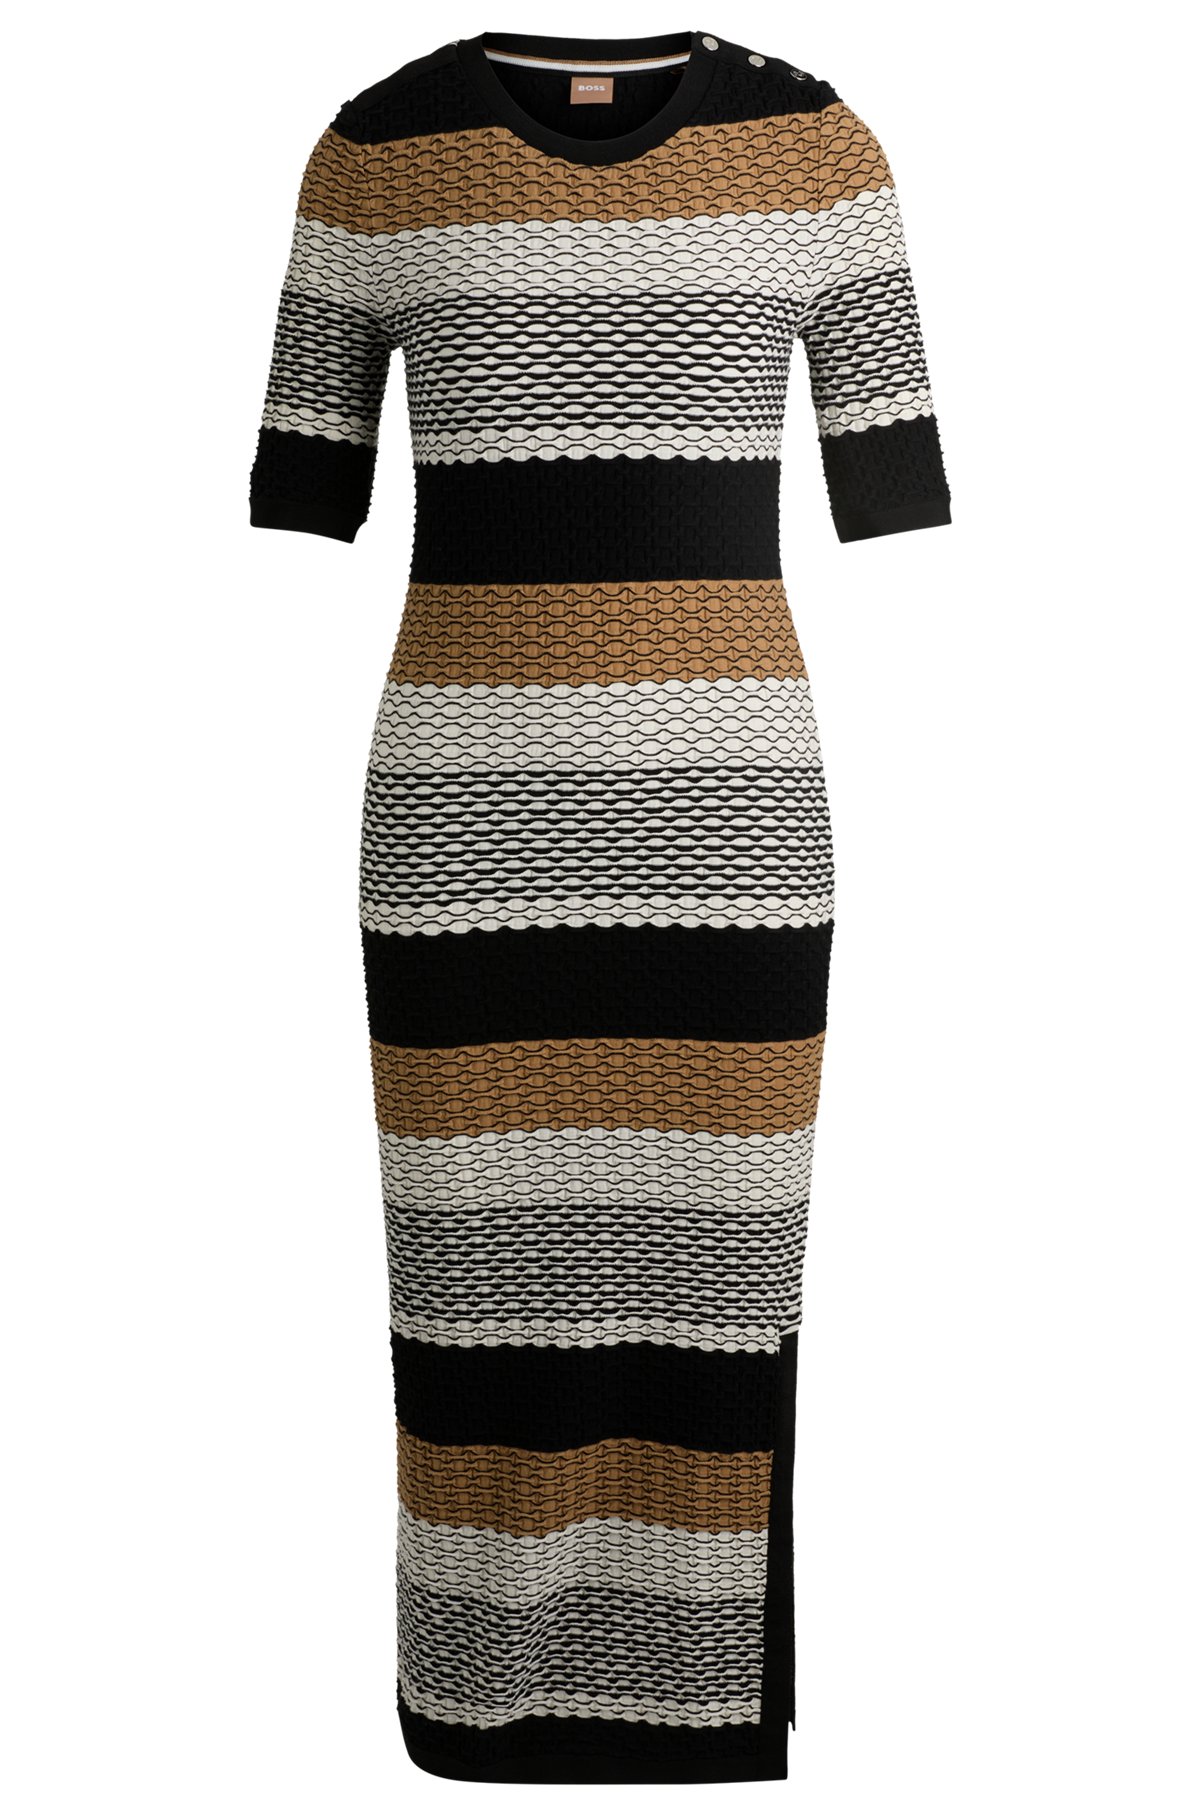 BOSS - Structured-stripe dress in stretch-cotton jersey